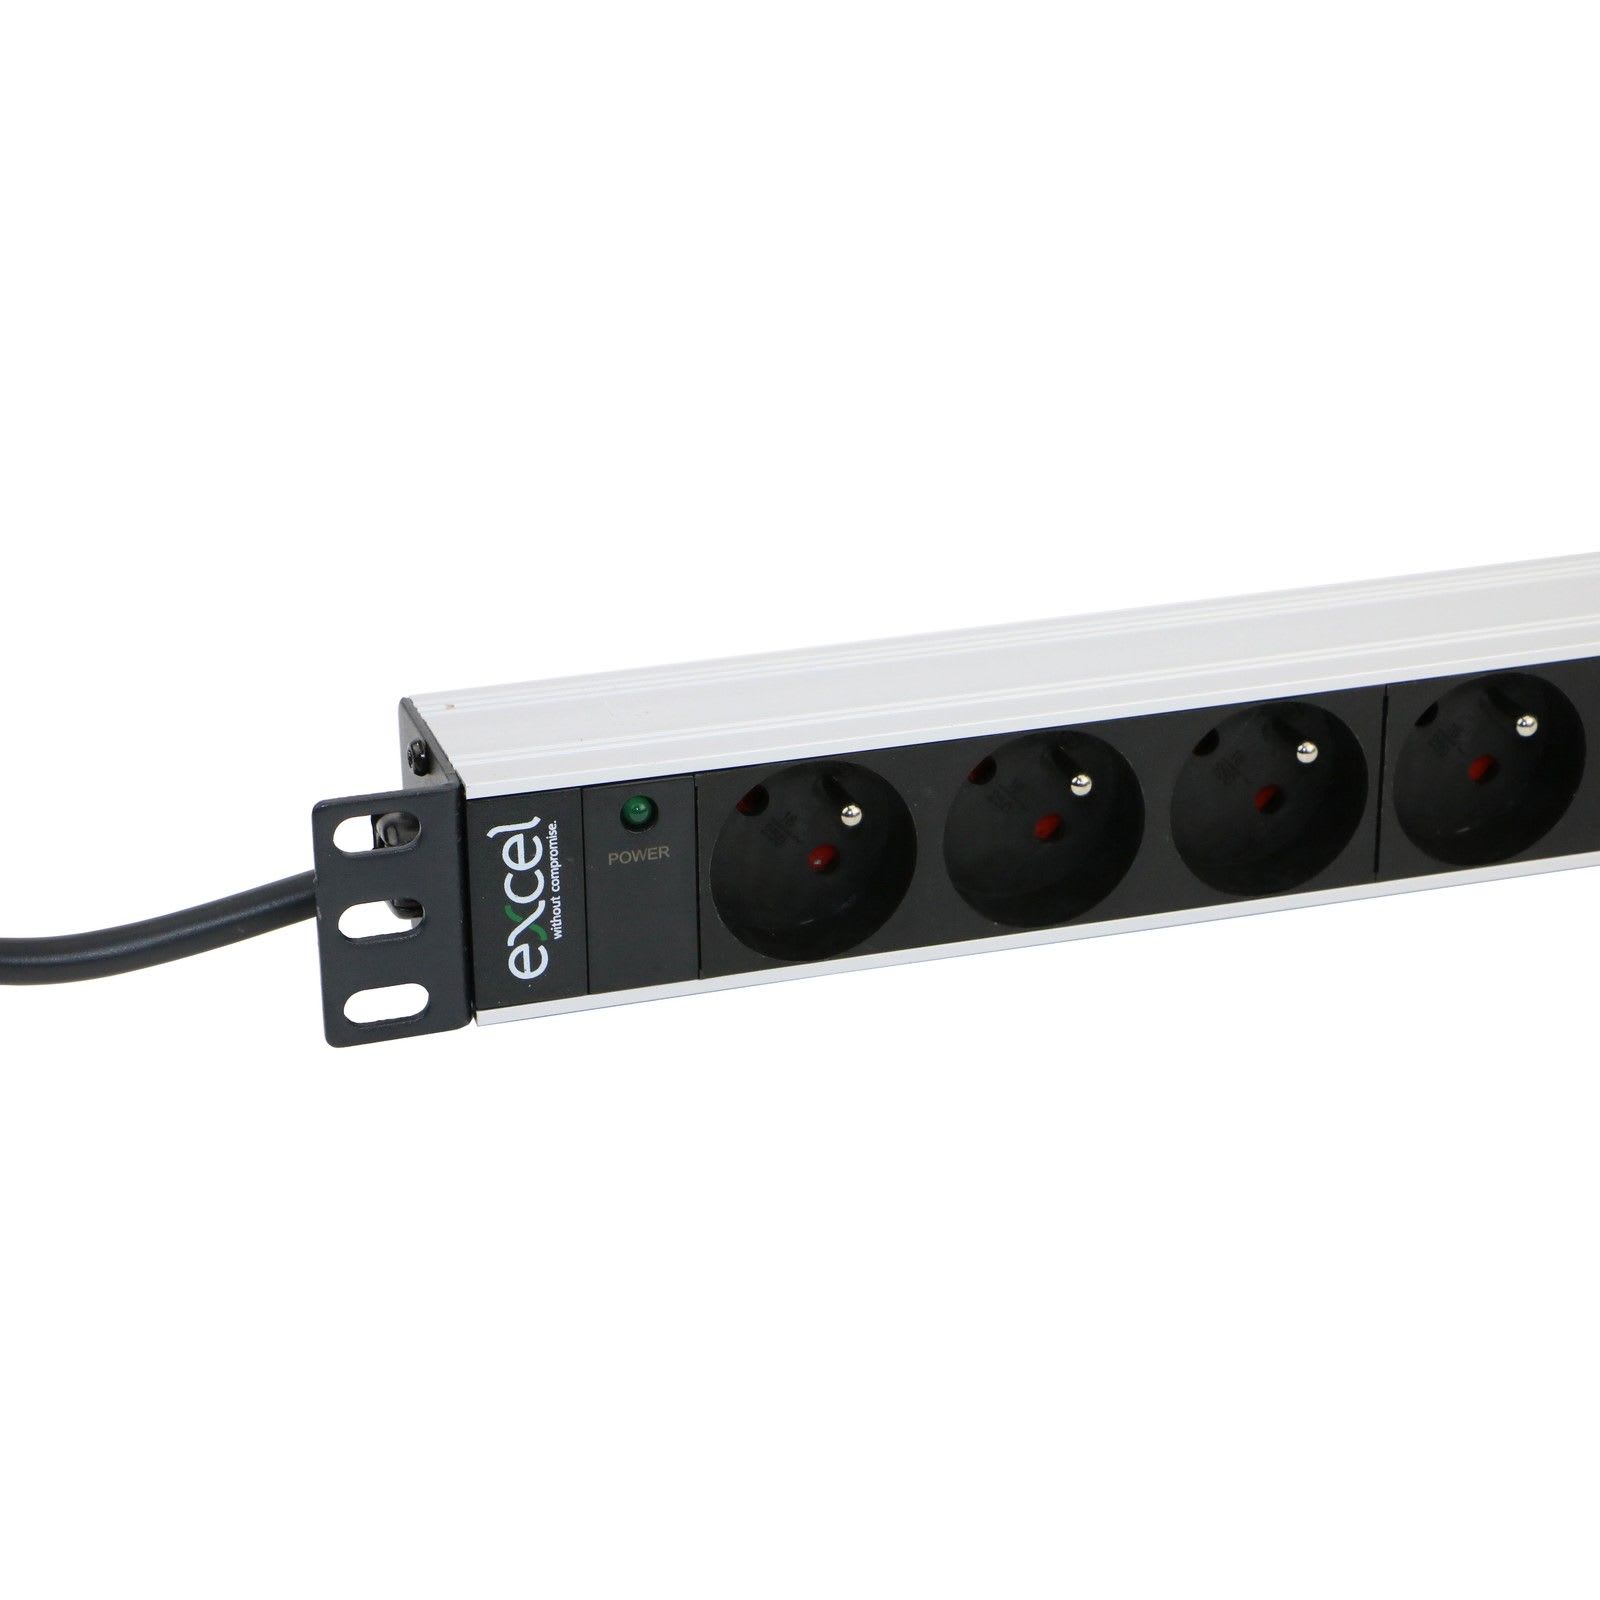 Excel Networking - 6-way PDU c/w 6xNFC sockets, 16-Amp plug, Unswitched, w/ LED indicator